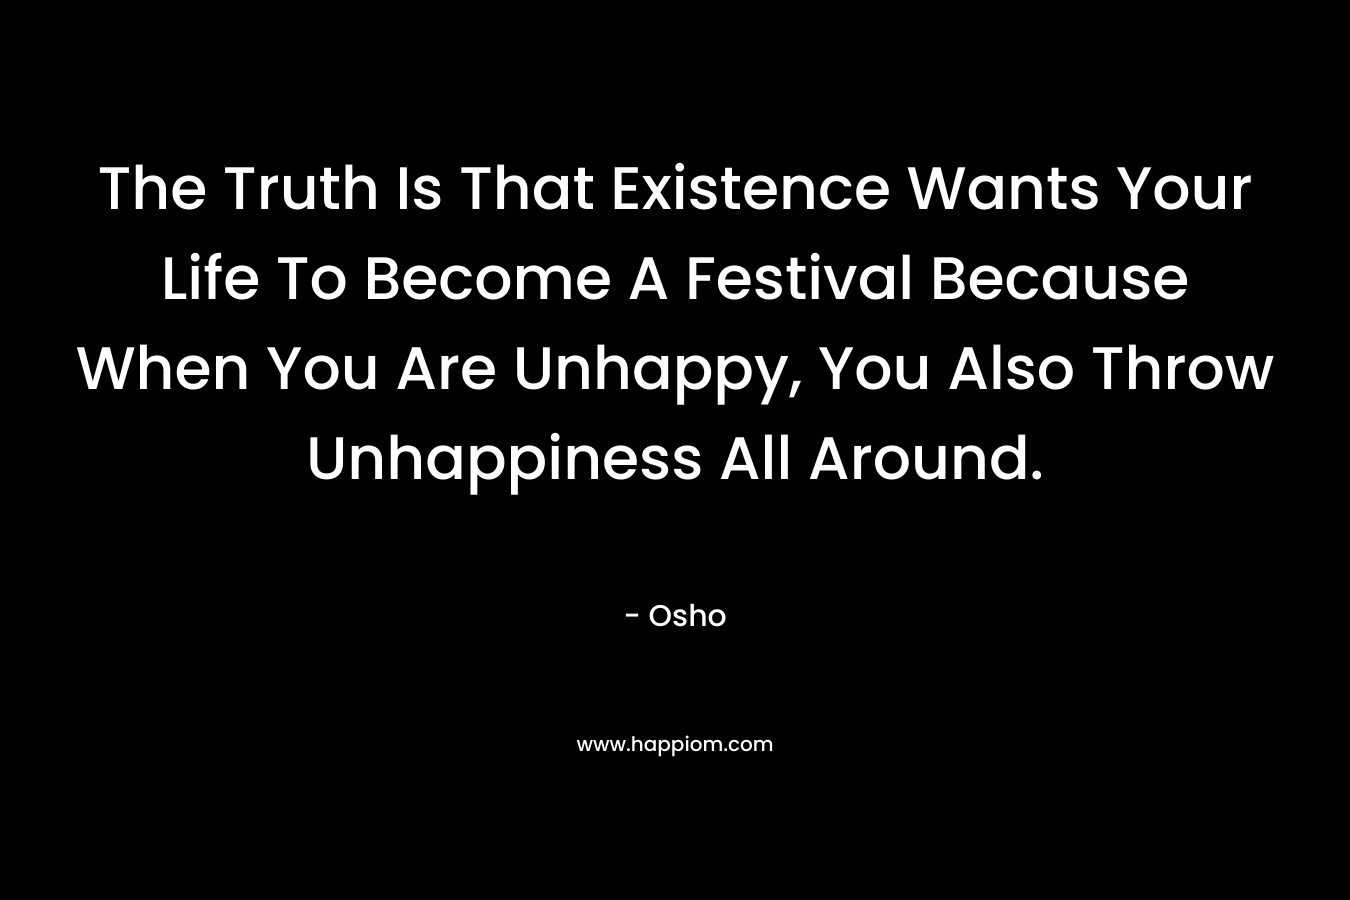 The Truth Is That Existence Wants Your Life To Become A Festival Because When You Are Unhappy, You Also Throw Unhappiness All Around.